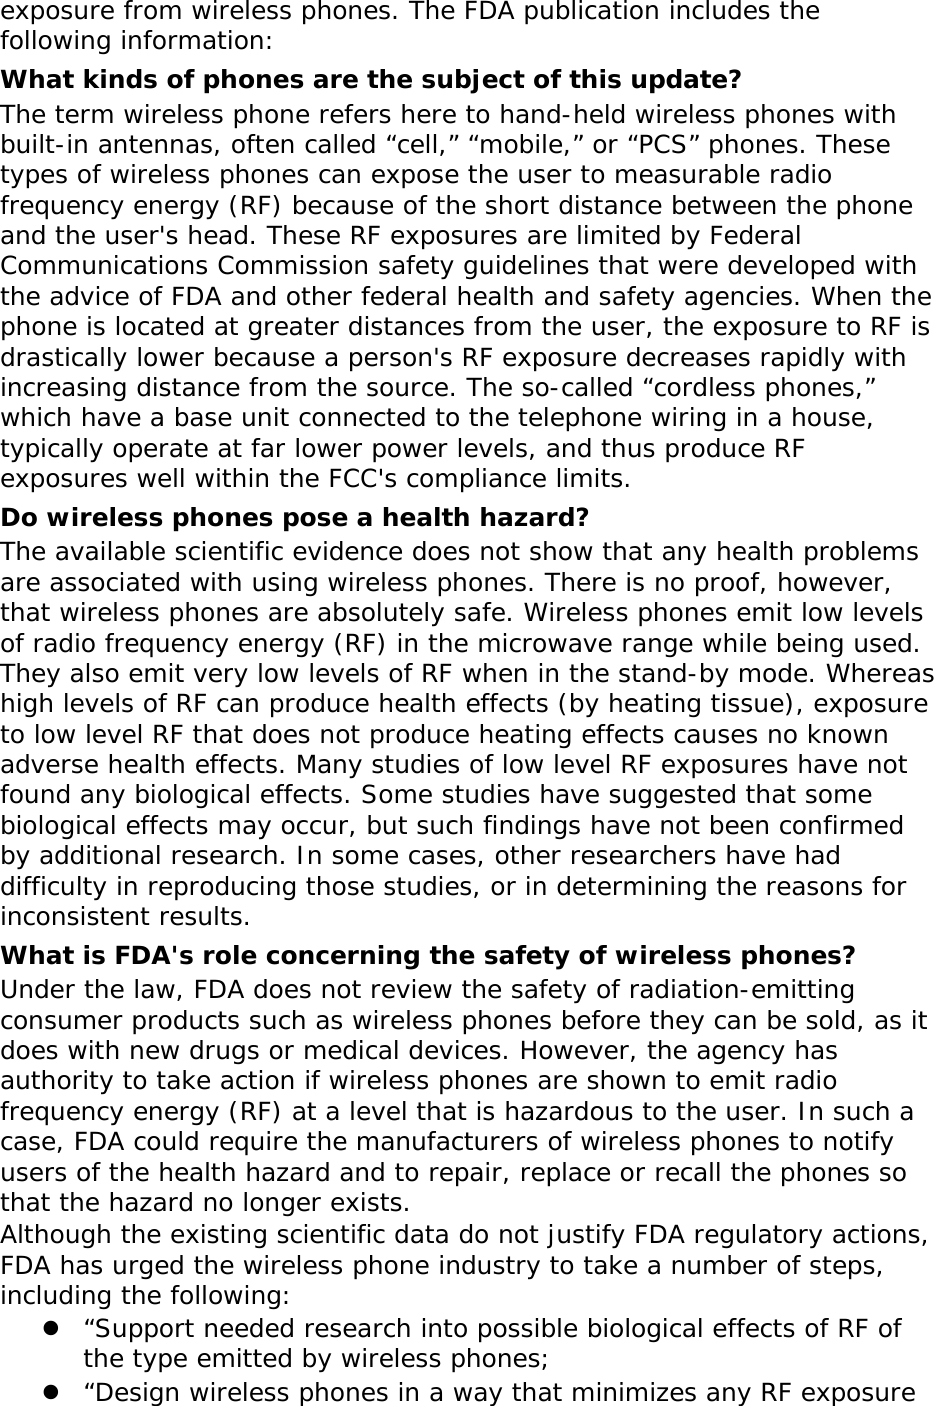   exposure from wireless phones. The FDA publication includes the following information: What kinds of phones are the subject of this update? The term wireless phone refers here to hand-held wireless phones with built-in antennas, often called “cell,” “mobile,” or “PCS” phones. These types of wireless phones can expose the user to measurable radio frequency energy (RF) because of the short distance between the phone and the user&apos;s head. These RF exposures are limited by Federal Communications Commission safety guidelines that were developed with the advice of FDA and other federal health and safety agencies. When the phone is located at greater distances from the user, the exposure to RF is drastically lower because a person&apos;s RF exposure decreases rapidly with increasing distance from the source. The so-called “cordless phones,” which have a base unit connected to the telephone wiring in a house, typically operate at far lower power levels, and thus produce RF exposures well within the FCC&apos;s compliance limits. Do wireless phones pose a health hazard? The available scientific evidence does not show that any health problems are associated with using wireless phones. There is no proof, however, that wireless phones are absolutely safe. Wireless phones emit low levels of radio frequency energy (RF) in the microwave range while being used. They also emit very low levels of RF when in the stand-by mode. Whereas high levels of RF can produce health effects (by heating tissue), exposure to low level RF that does not produce heating effects causes no known adverse health effects. Many studies of low level RF exposures have not found any biological effects. Some studies have suggested that some biological effects may occur, but such findings have not been confirmed by additional research. In some cases, other researchers have had difficulty in reproducing those studies, or in determining the reasons for inconsistent results. What is FDA&apos;s role concerning the safety of wireless phones? Under the law, FDA does not review the safety of radiation-emitting consumer products such as wireless phones before they can be sold, as it does with new drugs or medical devices. However, the agency has authority to take action if wireless phones are shown to emit radio frequency energy (RF) at a level that is hazardous to the user. In such a case, FDA could require the manufacturers of wireless phones to notify users of the health hazard and to repair, replace or recall the phones so that the hazard no longer exists. Although the existing scientific data do not justify FDA regulatory actions, FDA has urged the wireless phone industry to take a number of steps, including the following: z “Support needed research into possible biological effects of RF of the type emitted by wireless phones; z “Design wireless phones in a way that minimizes any RF exposure 